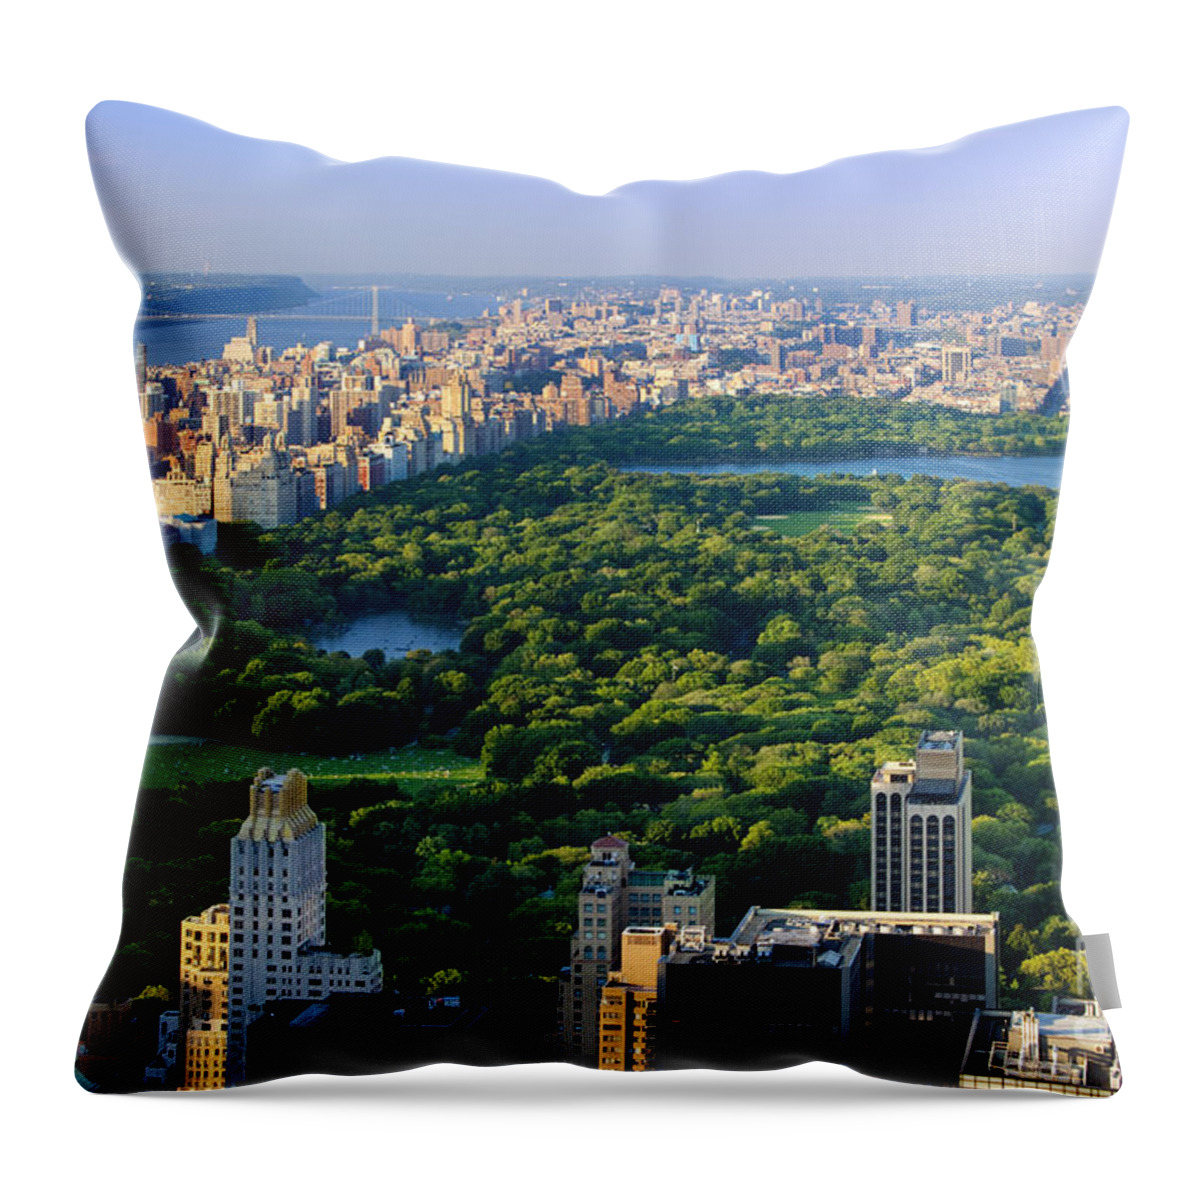 New York Throw Pillow featuring the photograph Central Park by Brian Jannsen